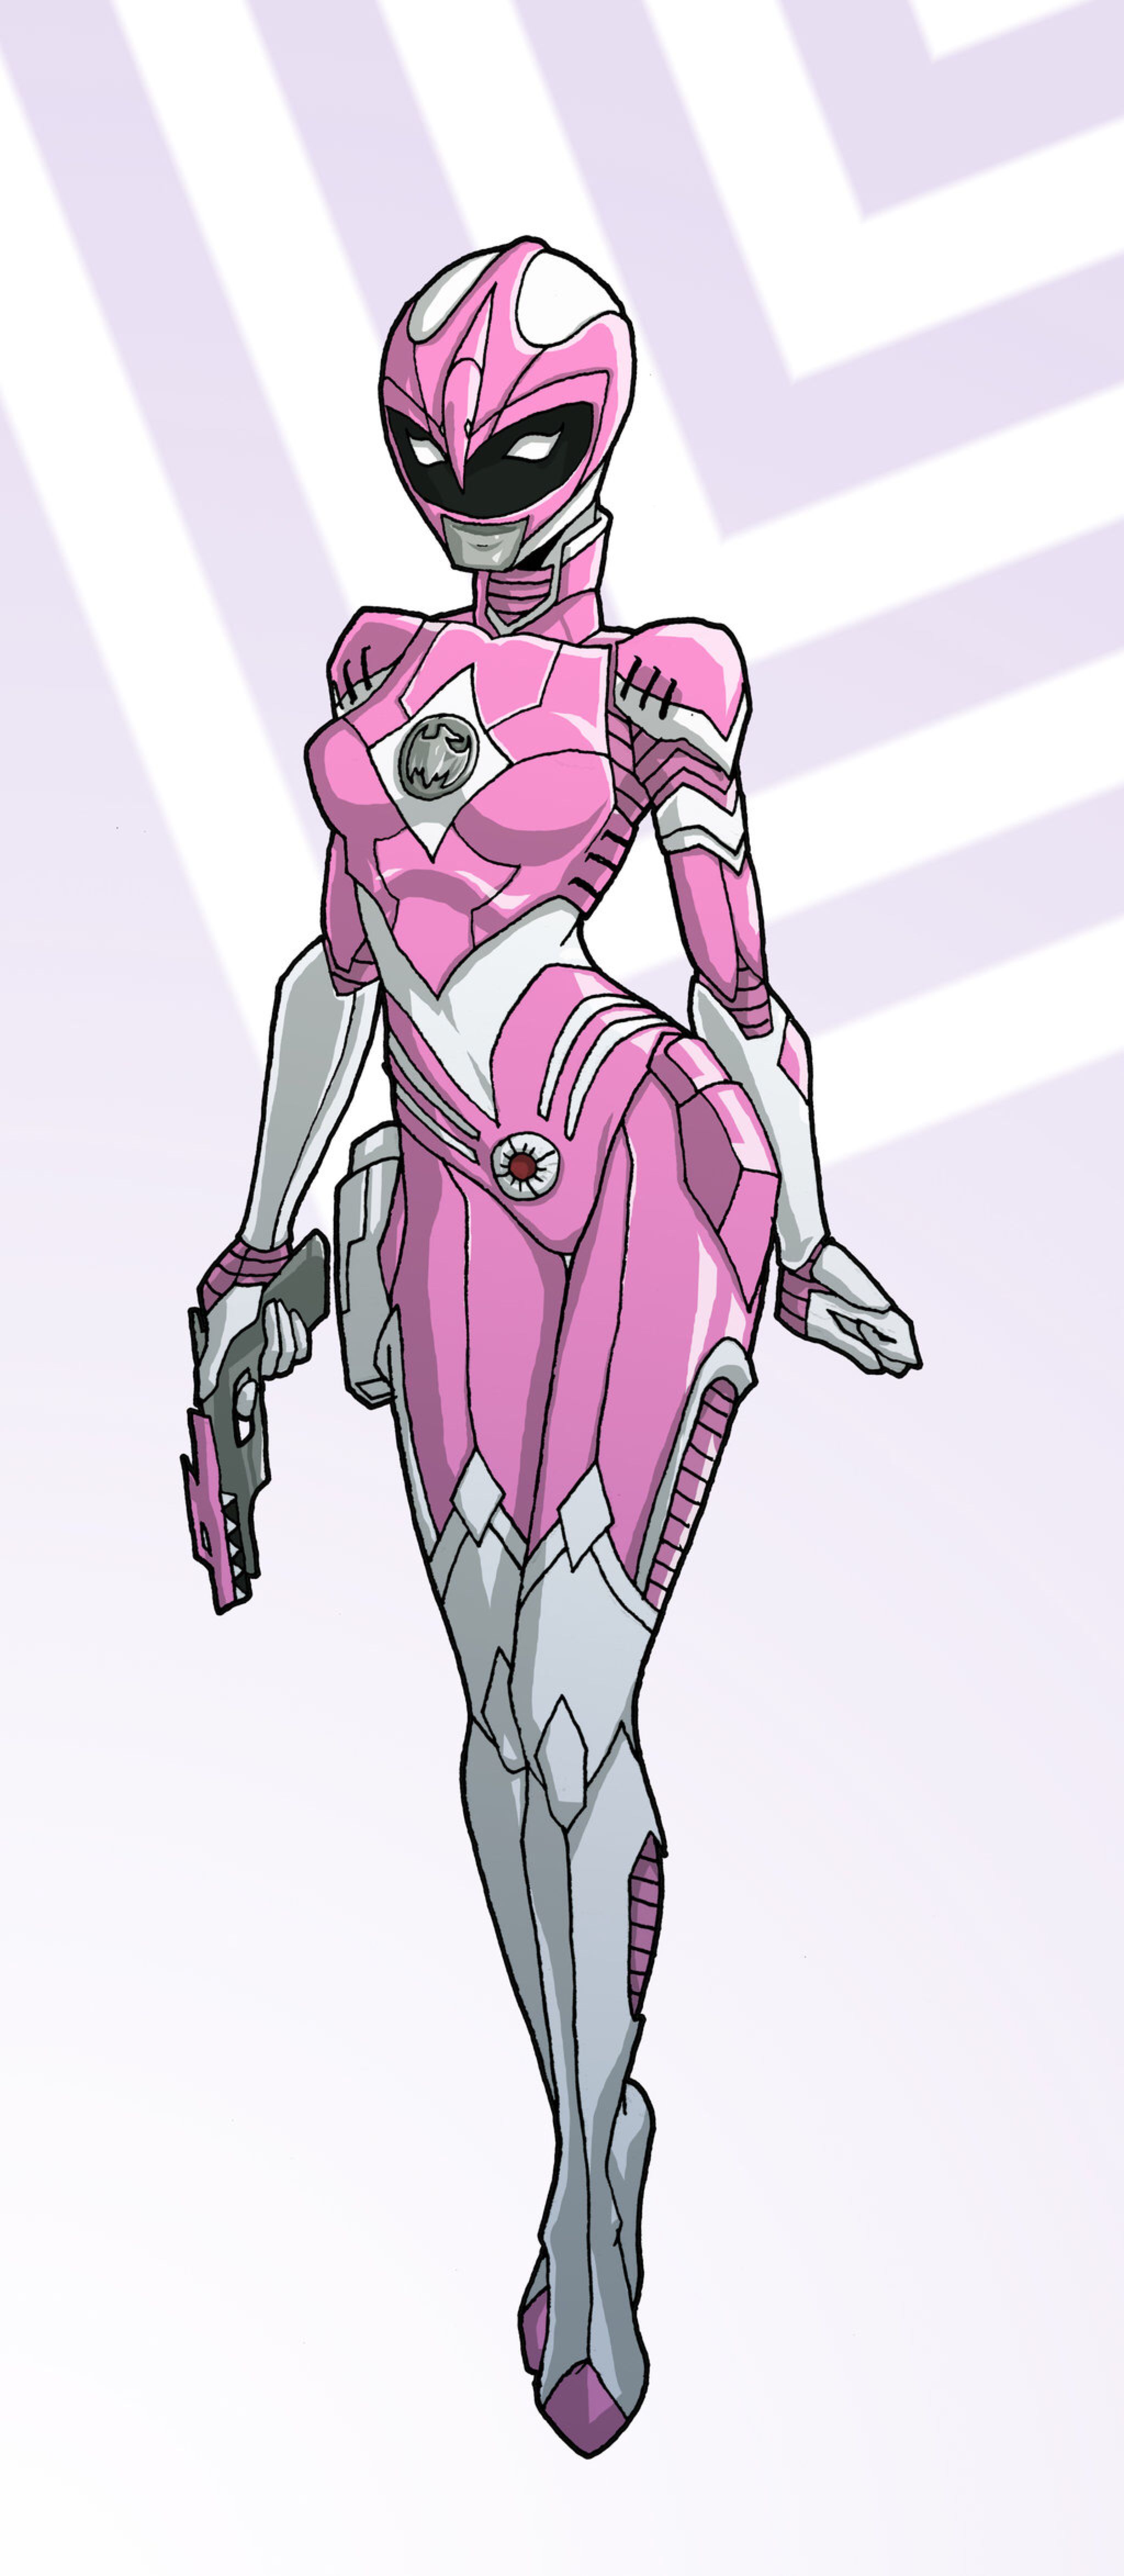 Pictures Of The Pink Power Ranger melo narbonne